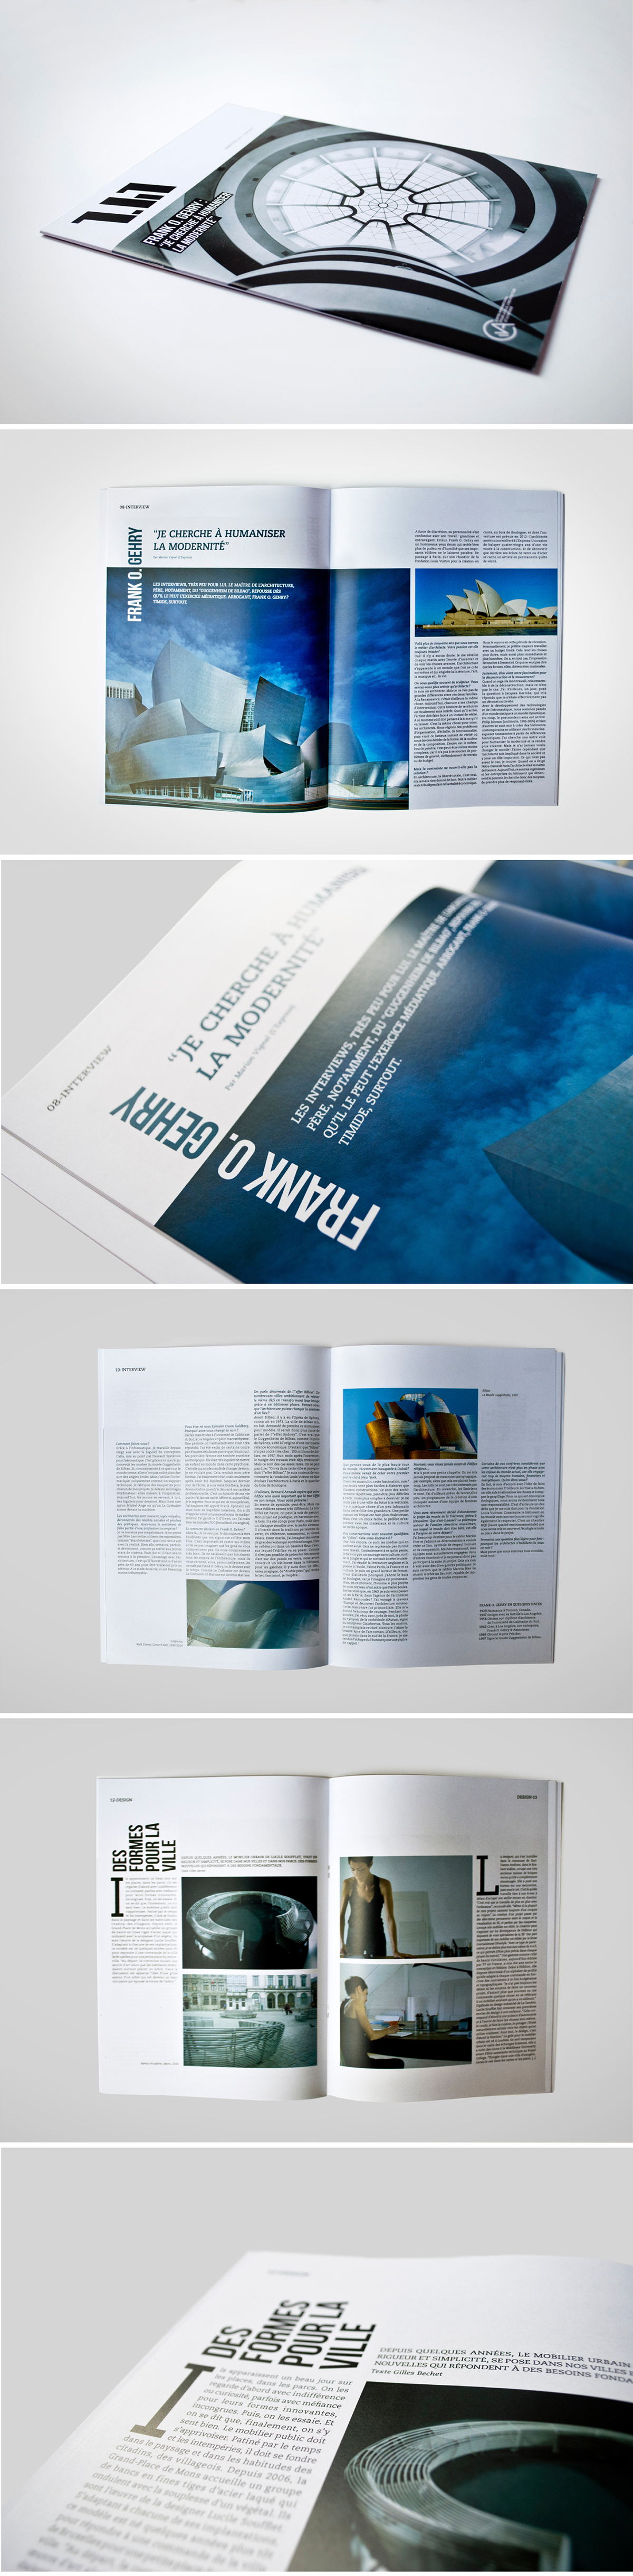 editorial design Layout magazine archi mise en page book